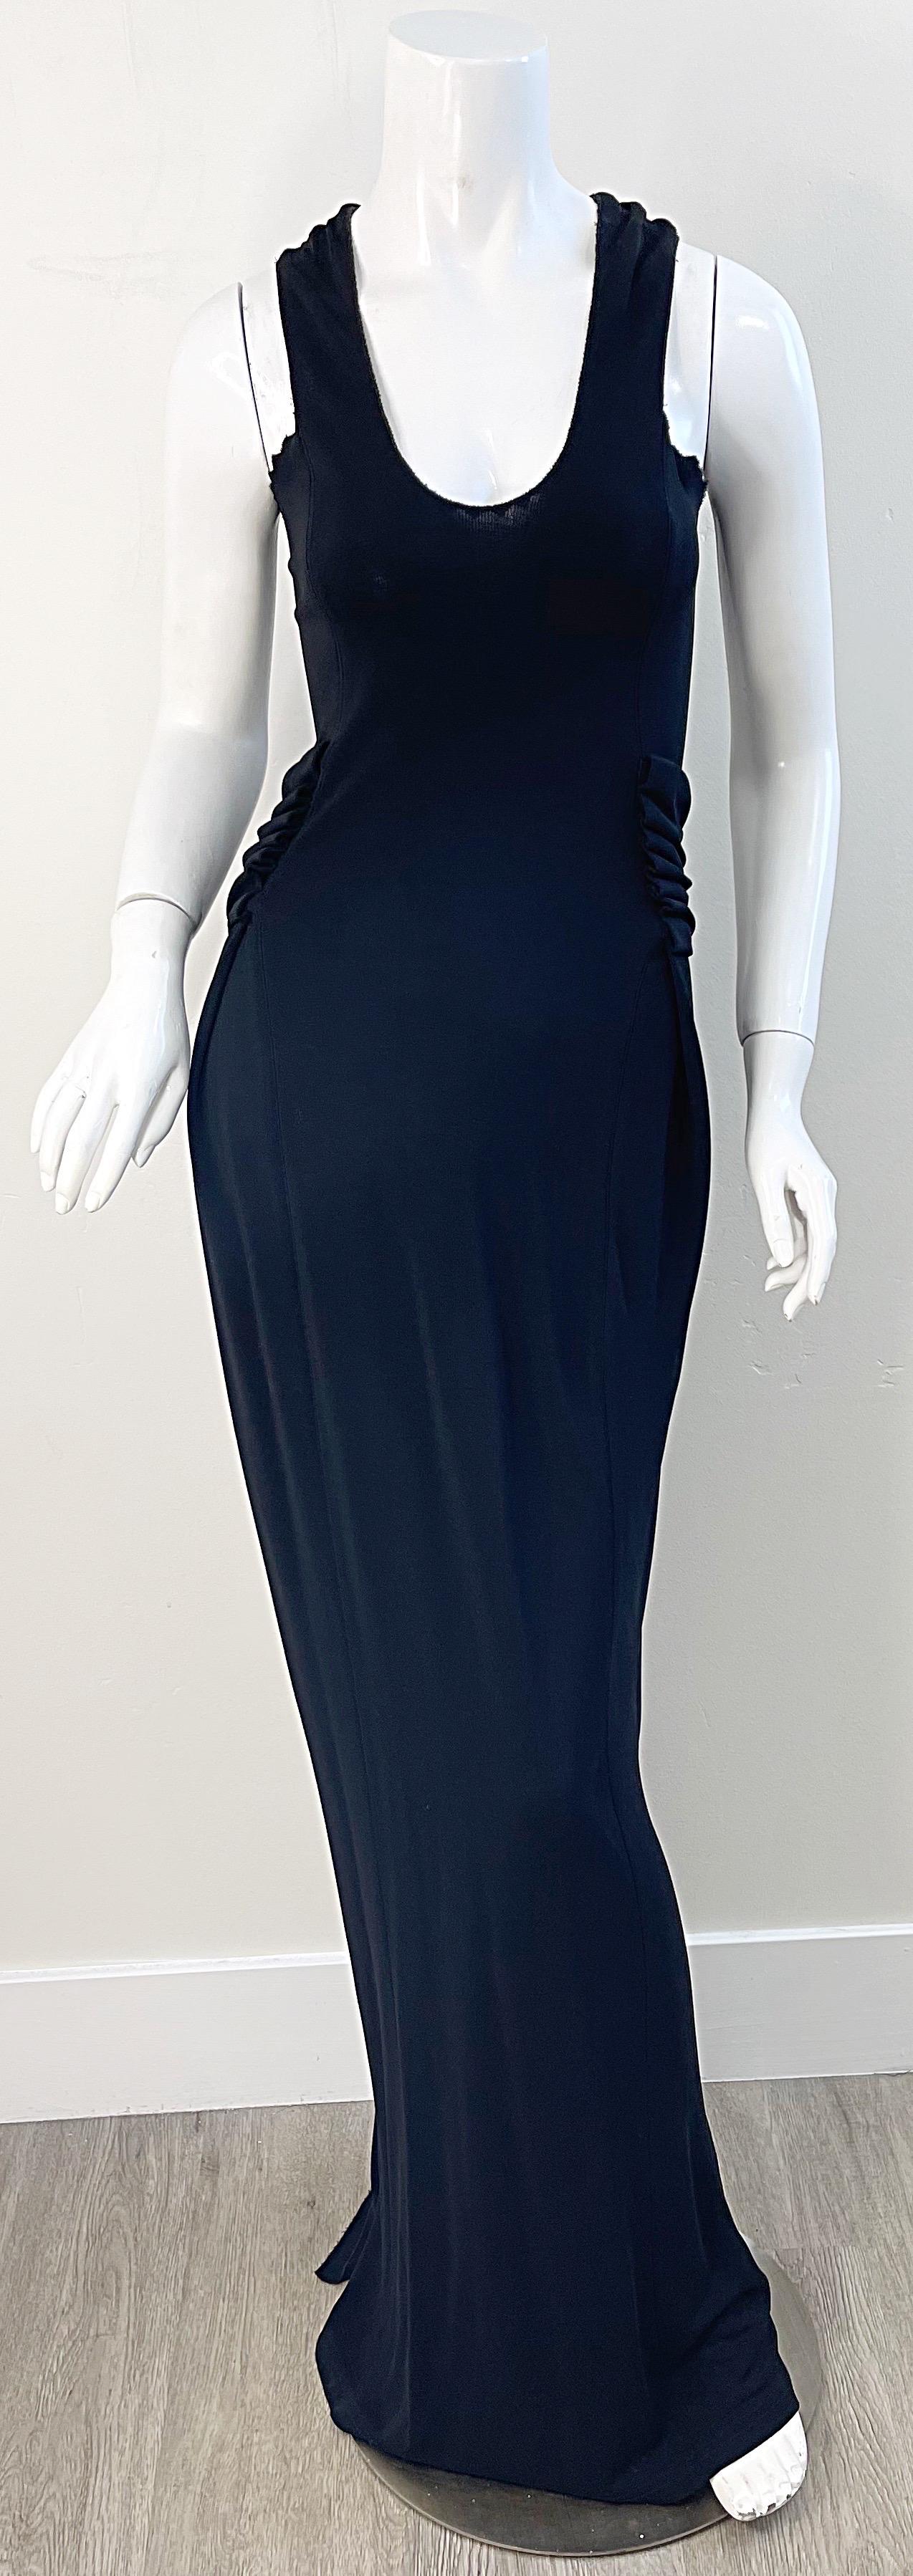 Tom Ford for Yves Saint Laurent Black Rayon Jersey Knit Vintage Sleeveless Gown In Excellent Condition For Sale In San Diego, CA